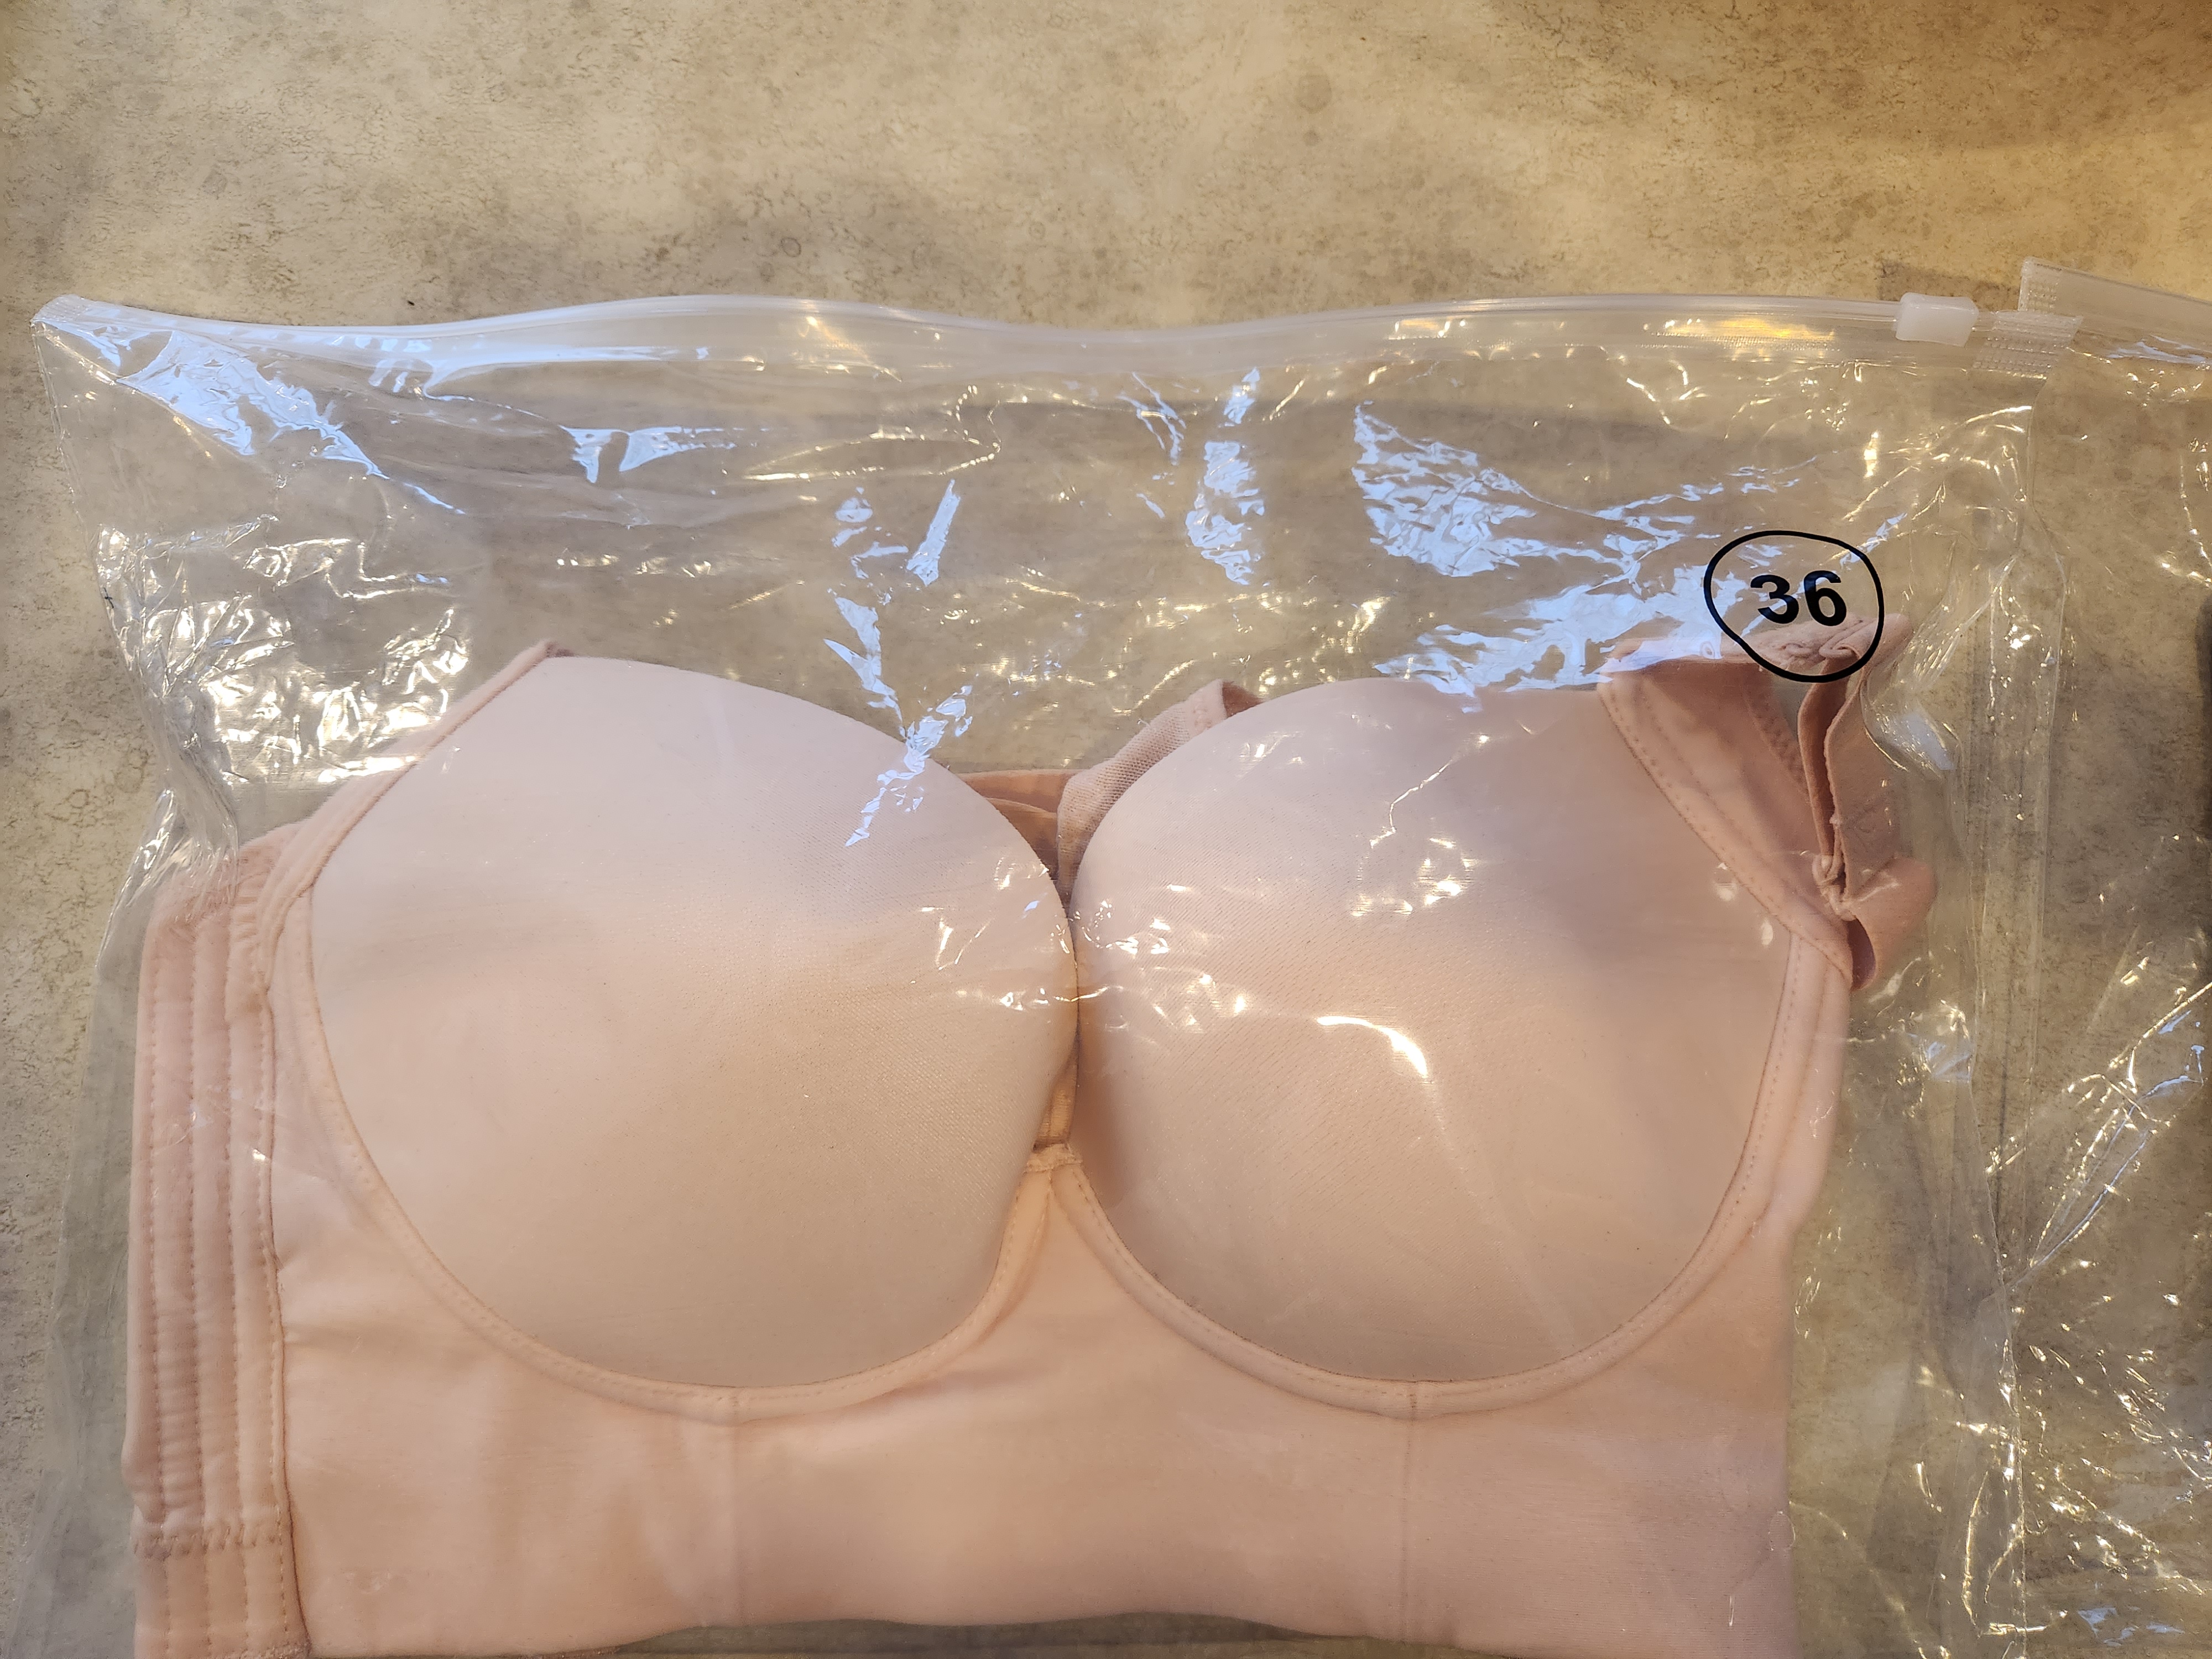 Maureened Bra Review (Mar 2023) Does It Have Legitimacy? Watch this Video!